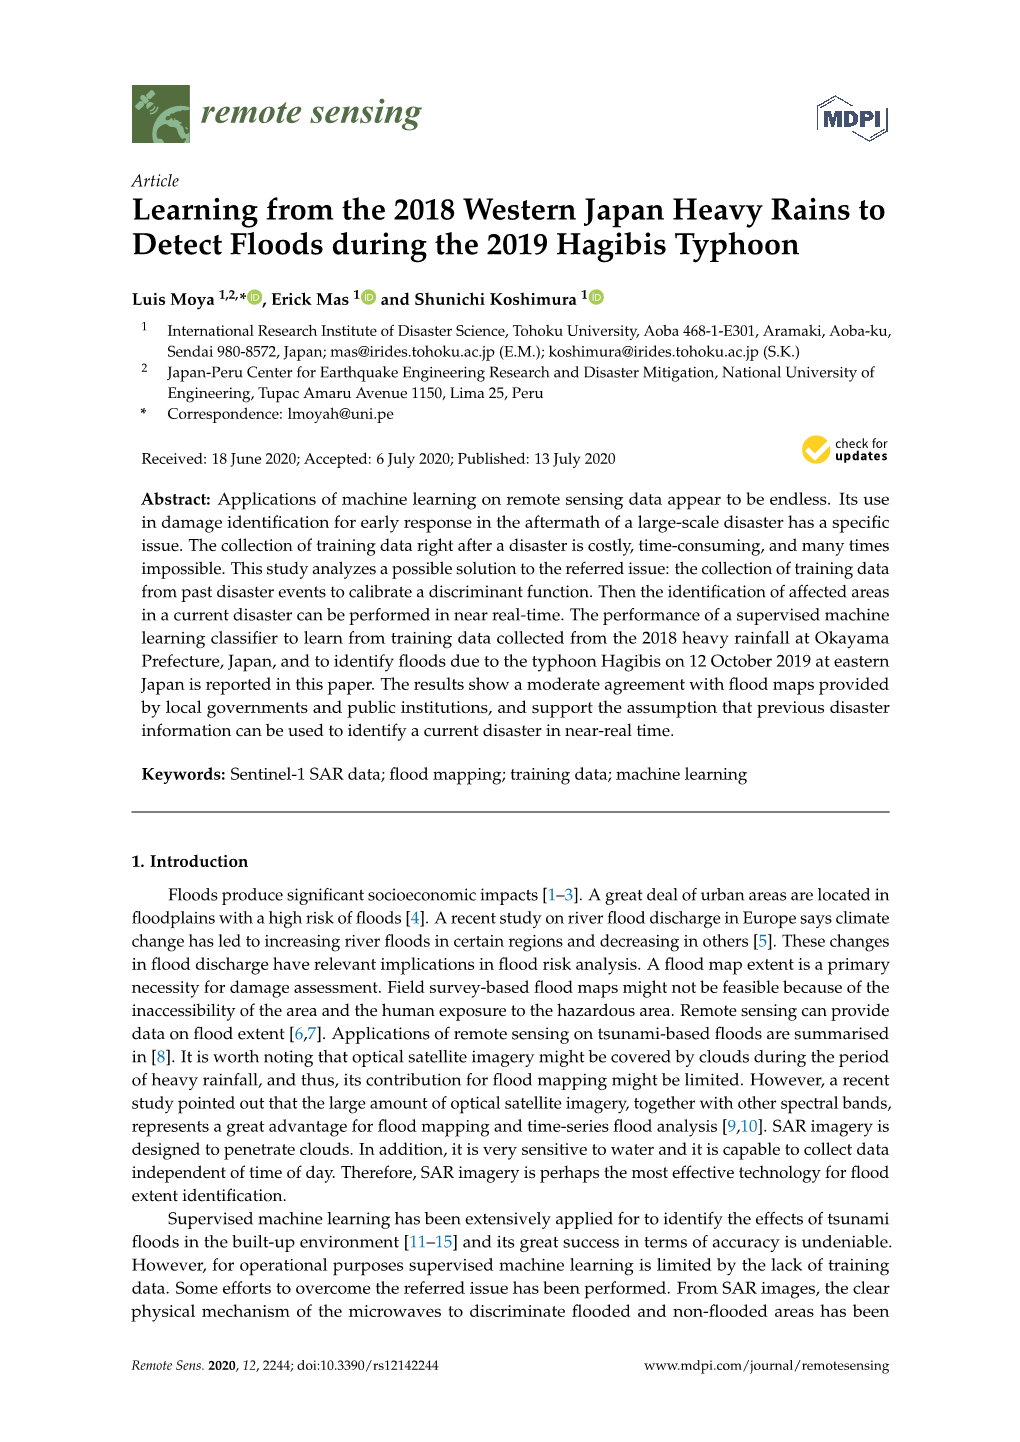 Learning from the 2018 Western Japan Heavy Rains to Detect Floods During the 2019 Hagibis Typhoon